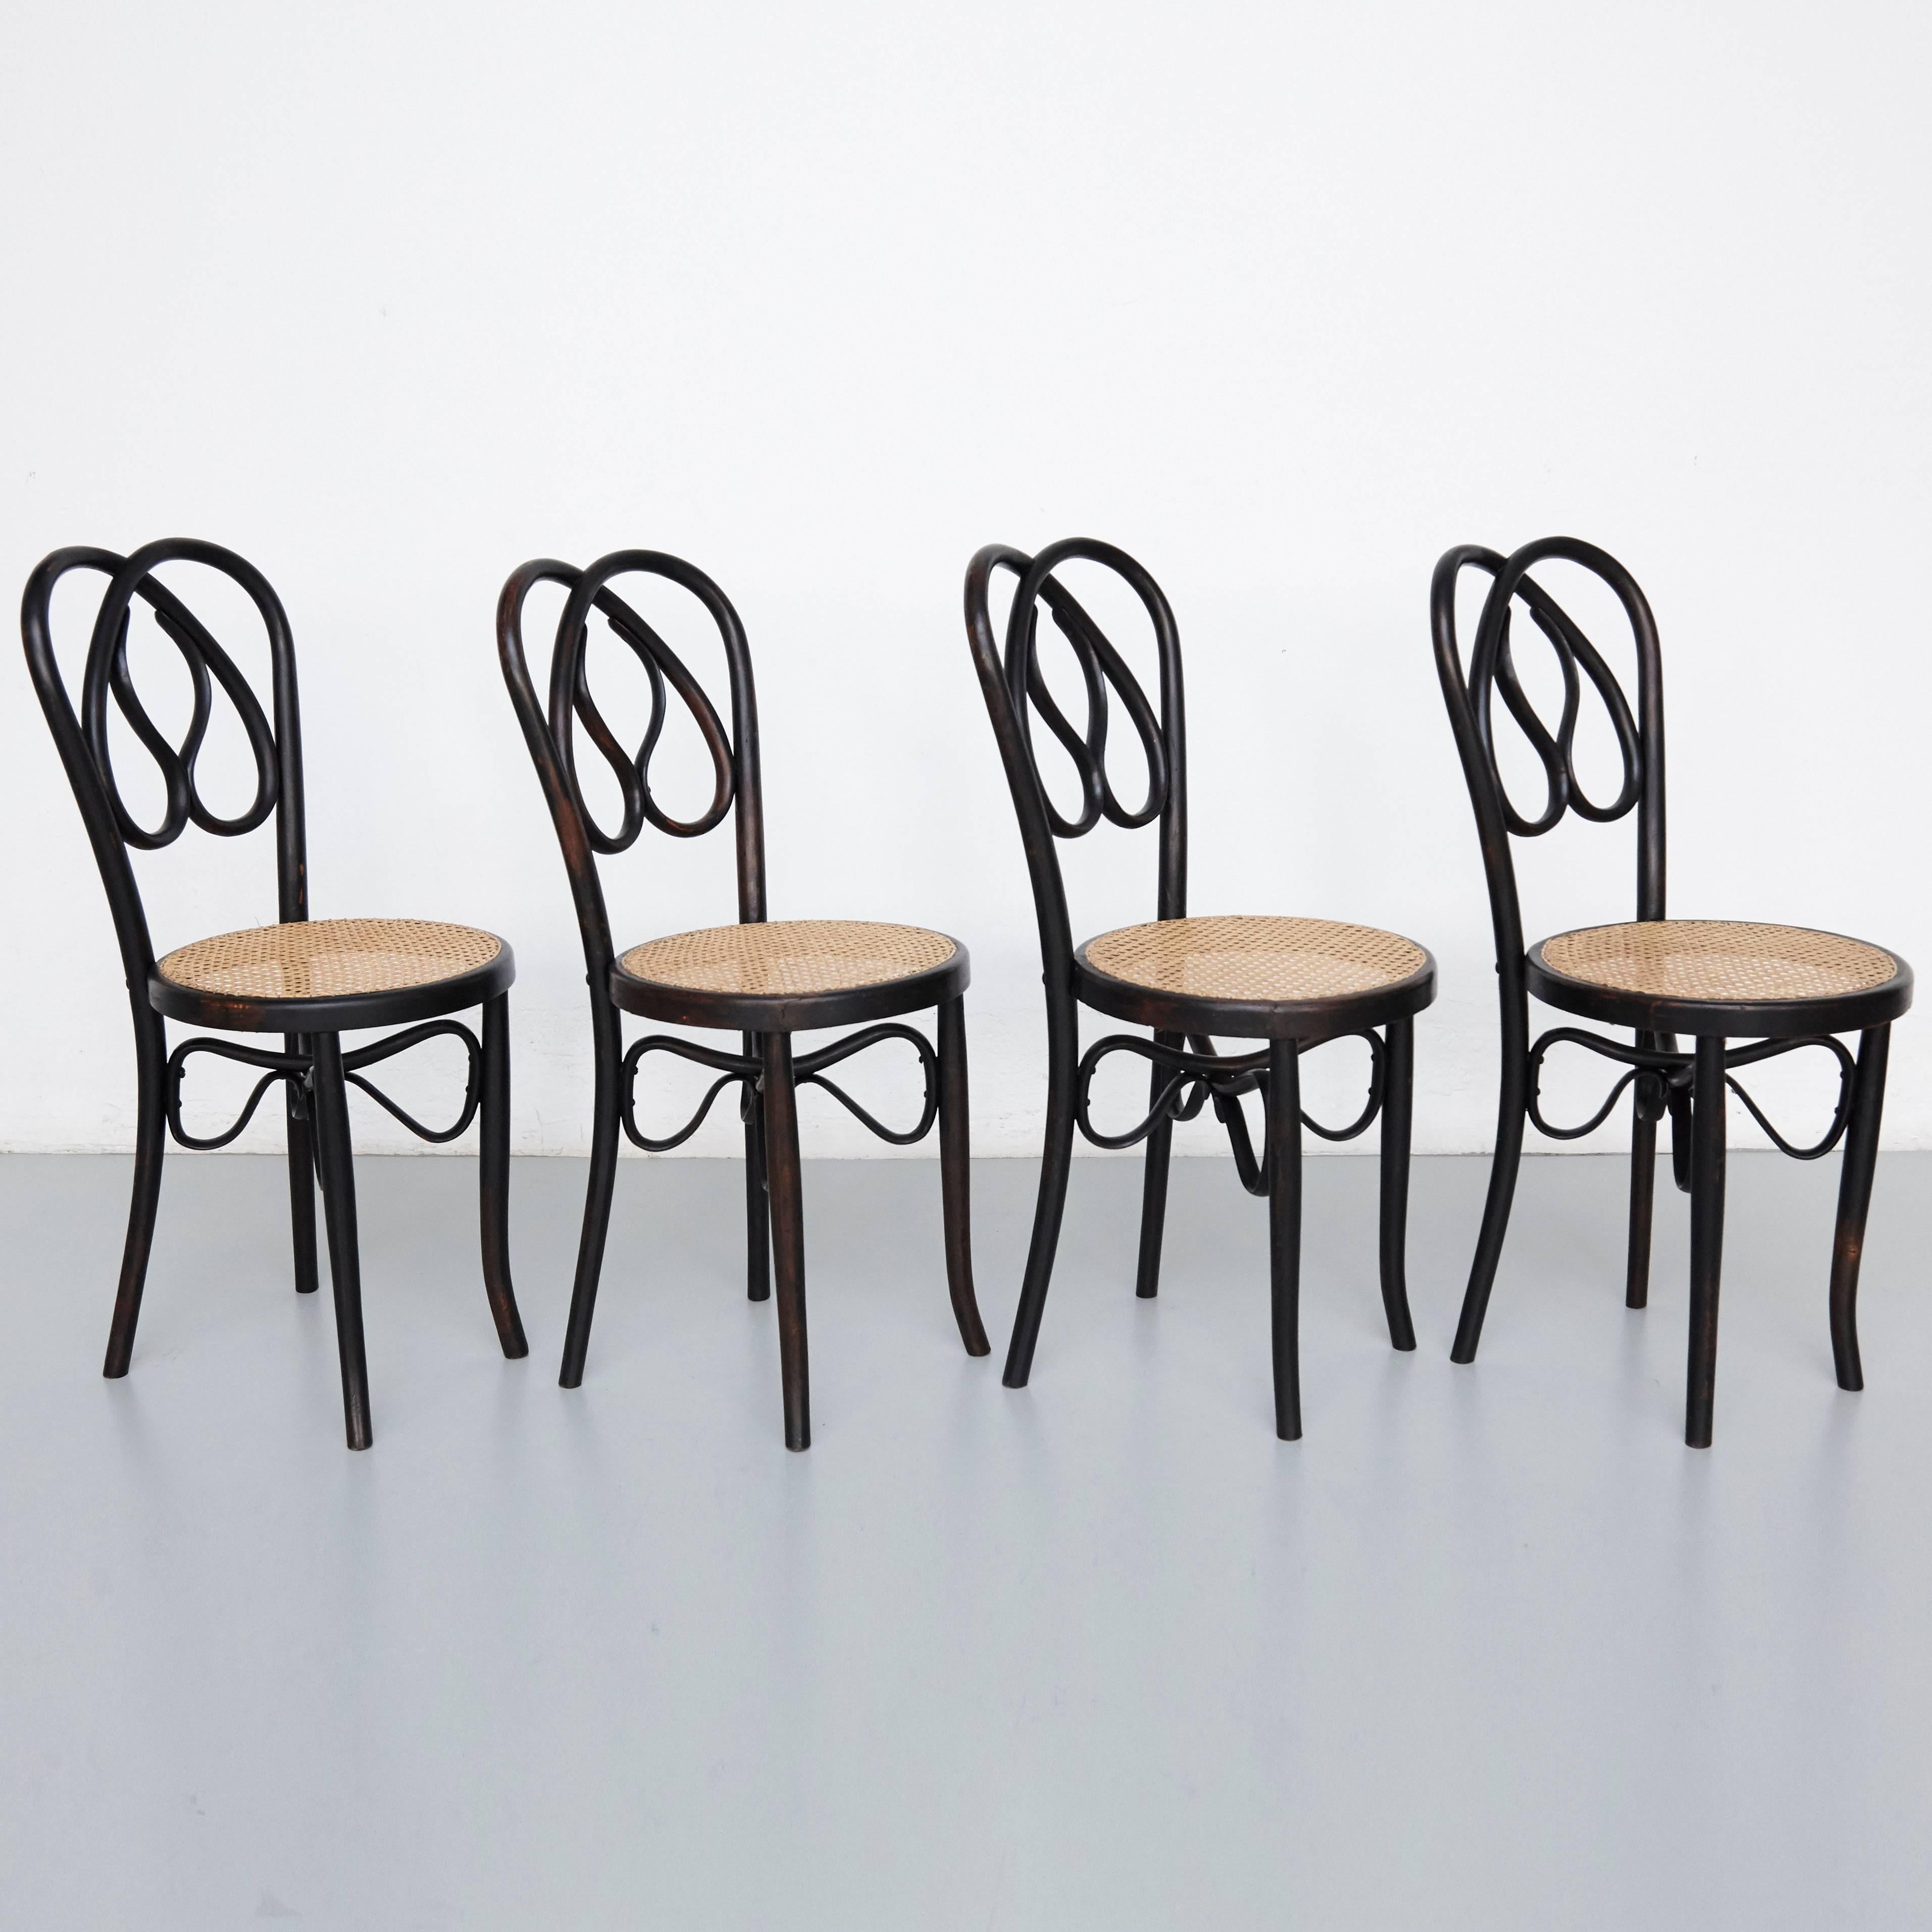 Chairs Nº41 designed by Ventura Feliu in Valencia (Spain), circa 1904.
Manufactured and patent by Ventura.

Bentwood base and legs, and rush seat.

In good original condition, with minor wear consistent with age and use, preserving a beautiful